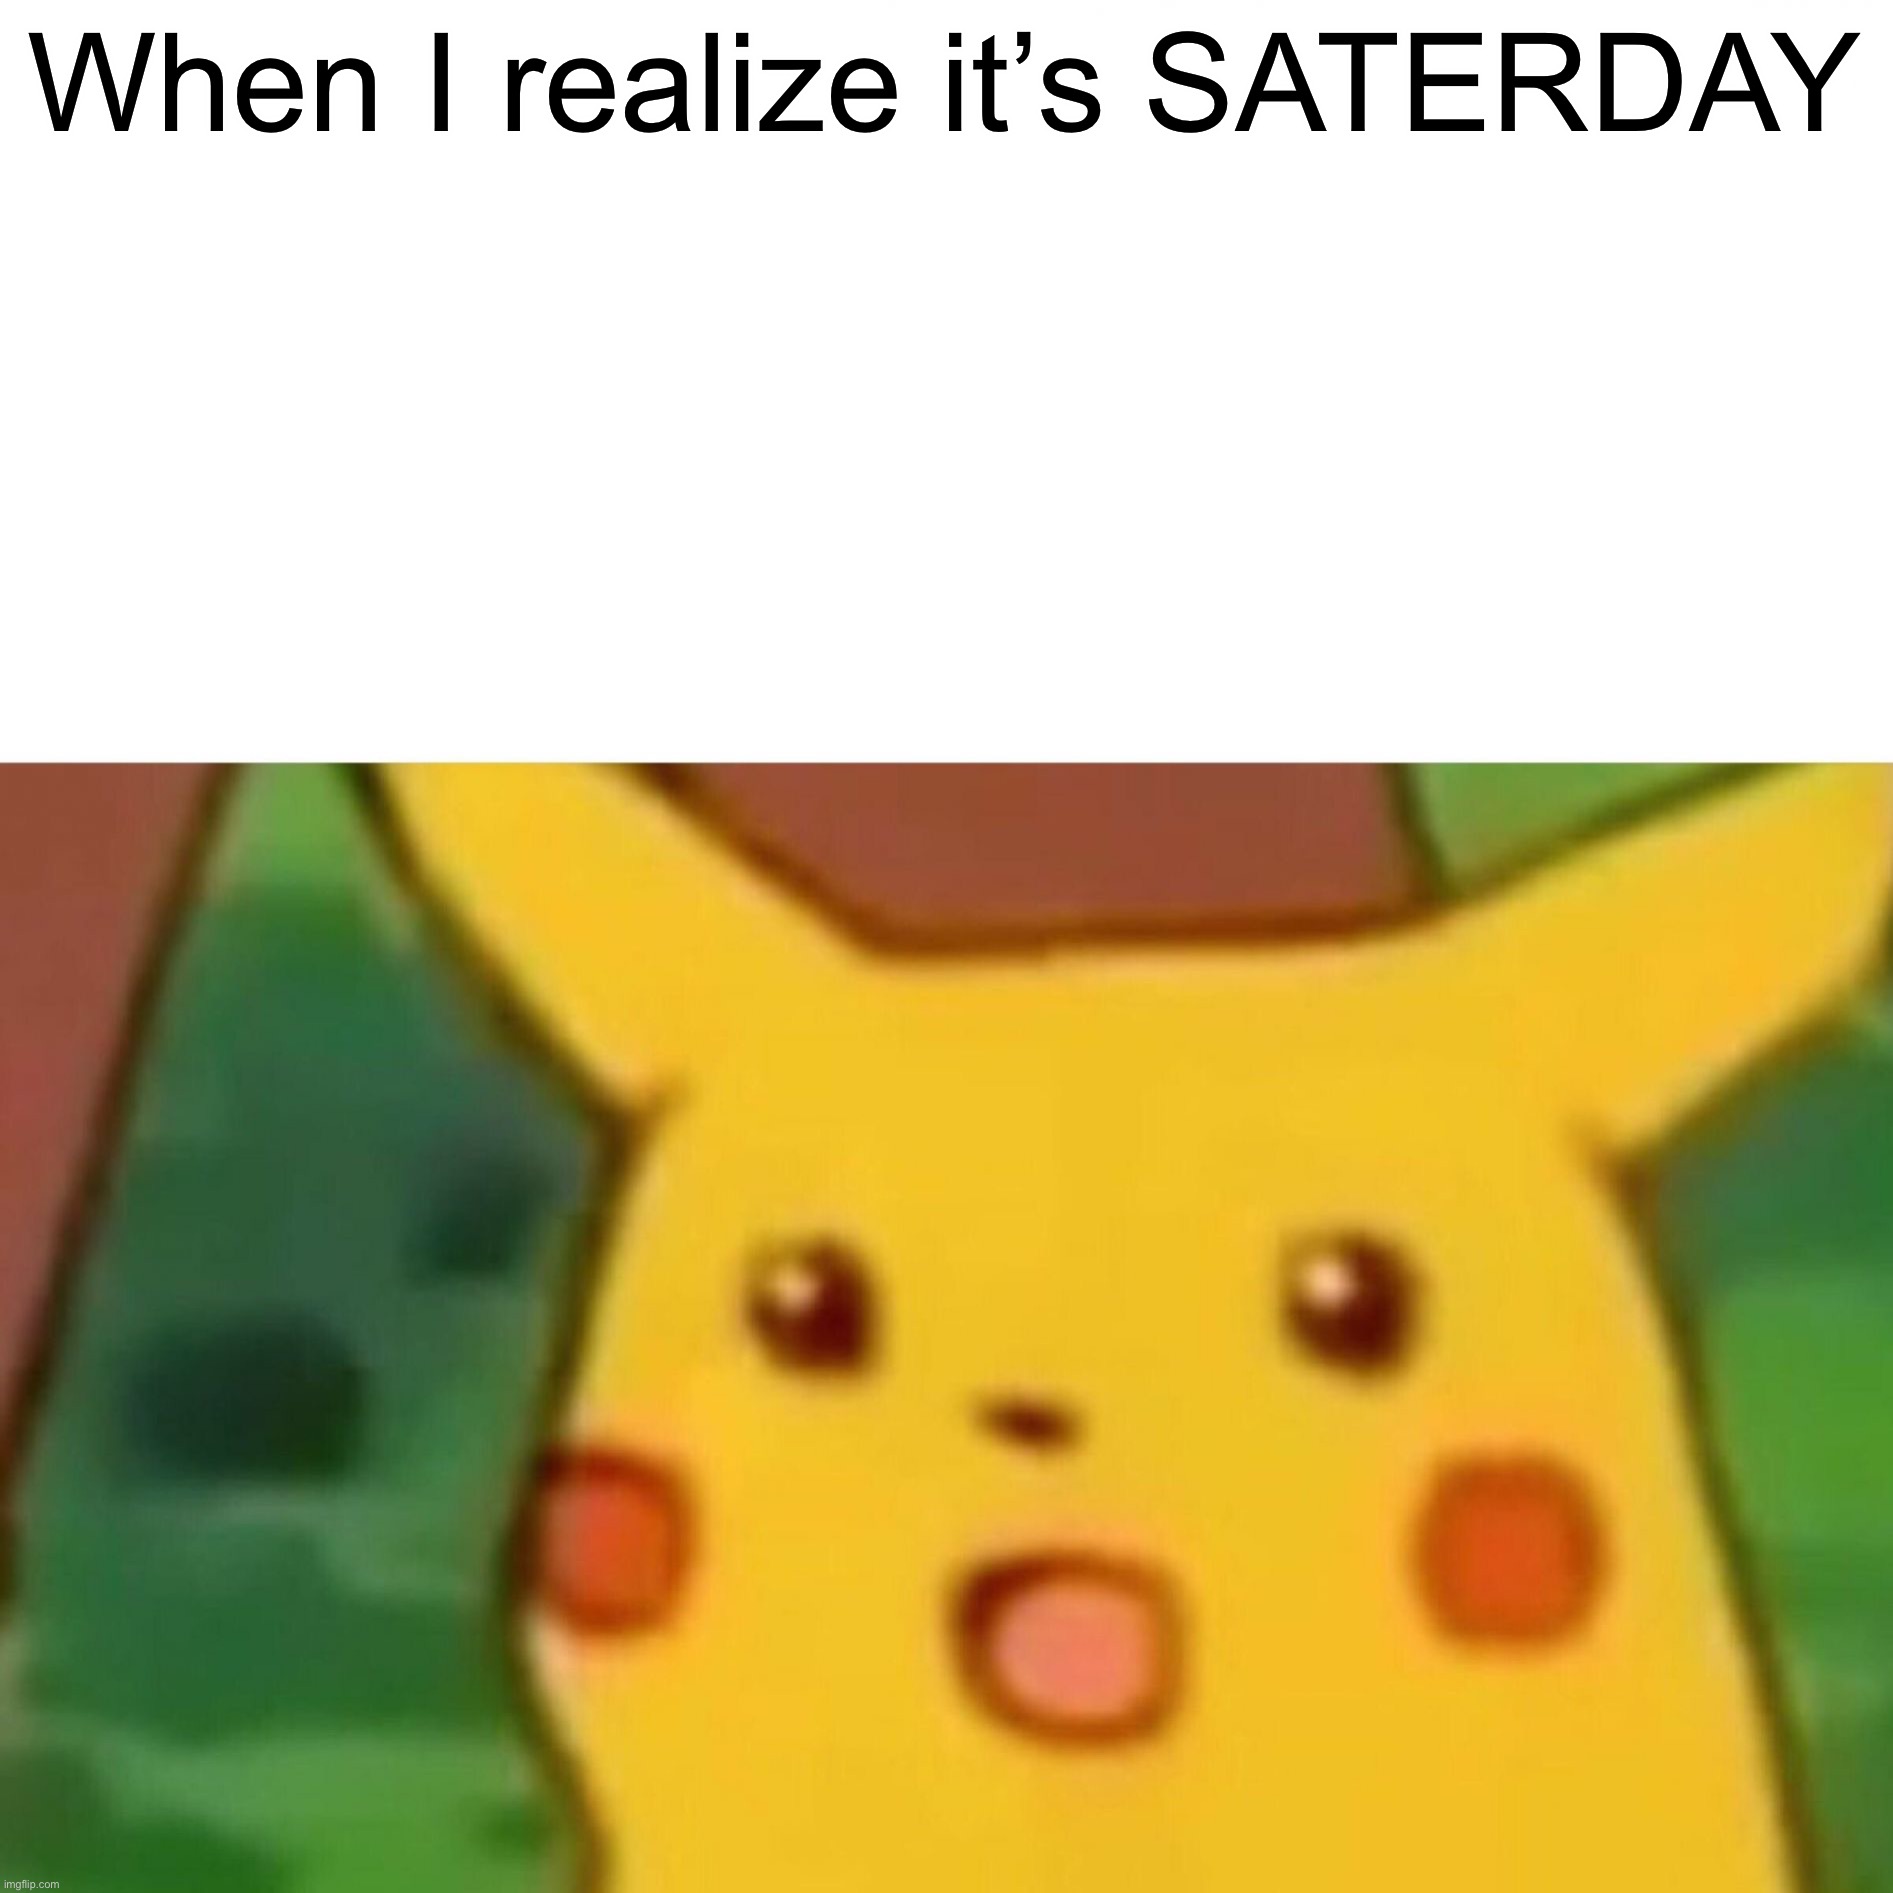 Surprised Pikachu | When I realize it’s SATERDAY | image tagged in memes,surprised pikachu | made w/ Imgflip meme maker